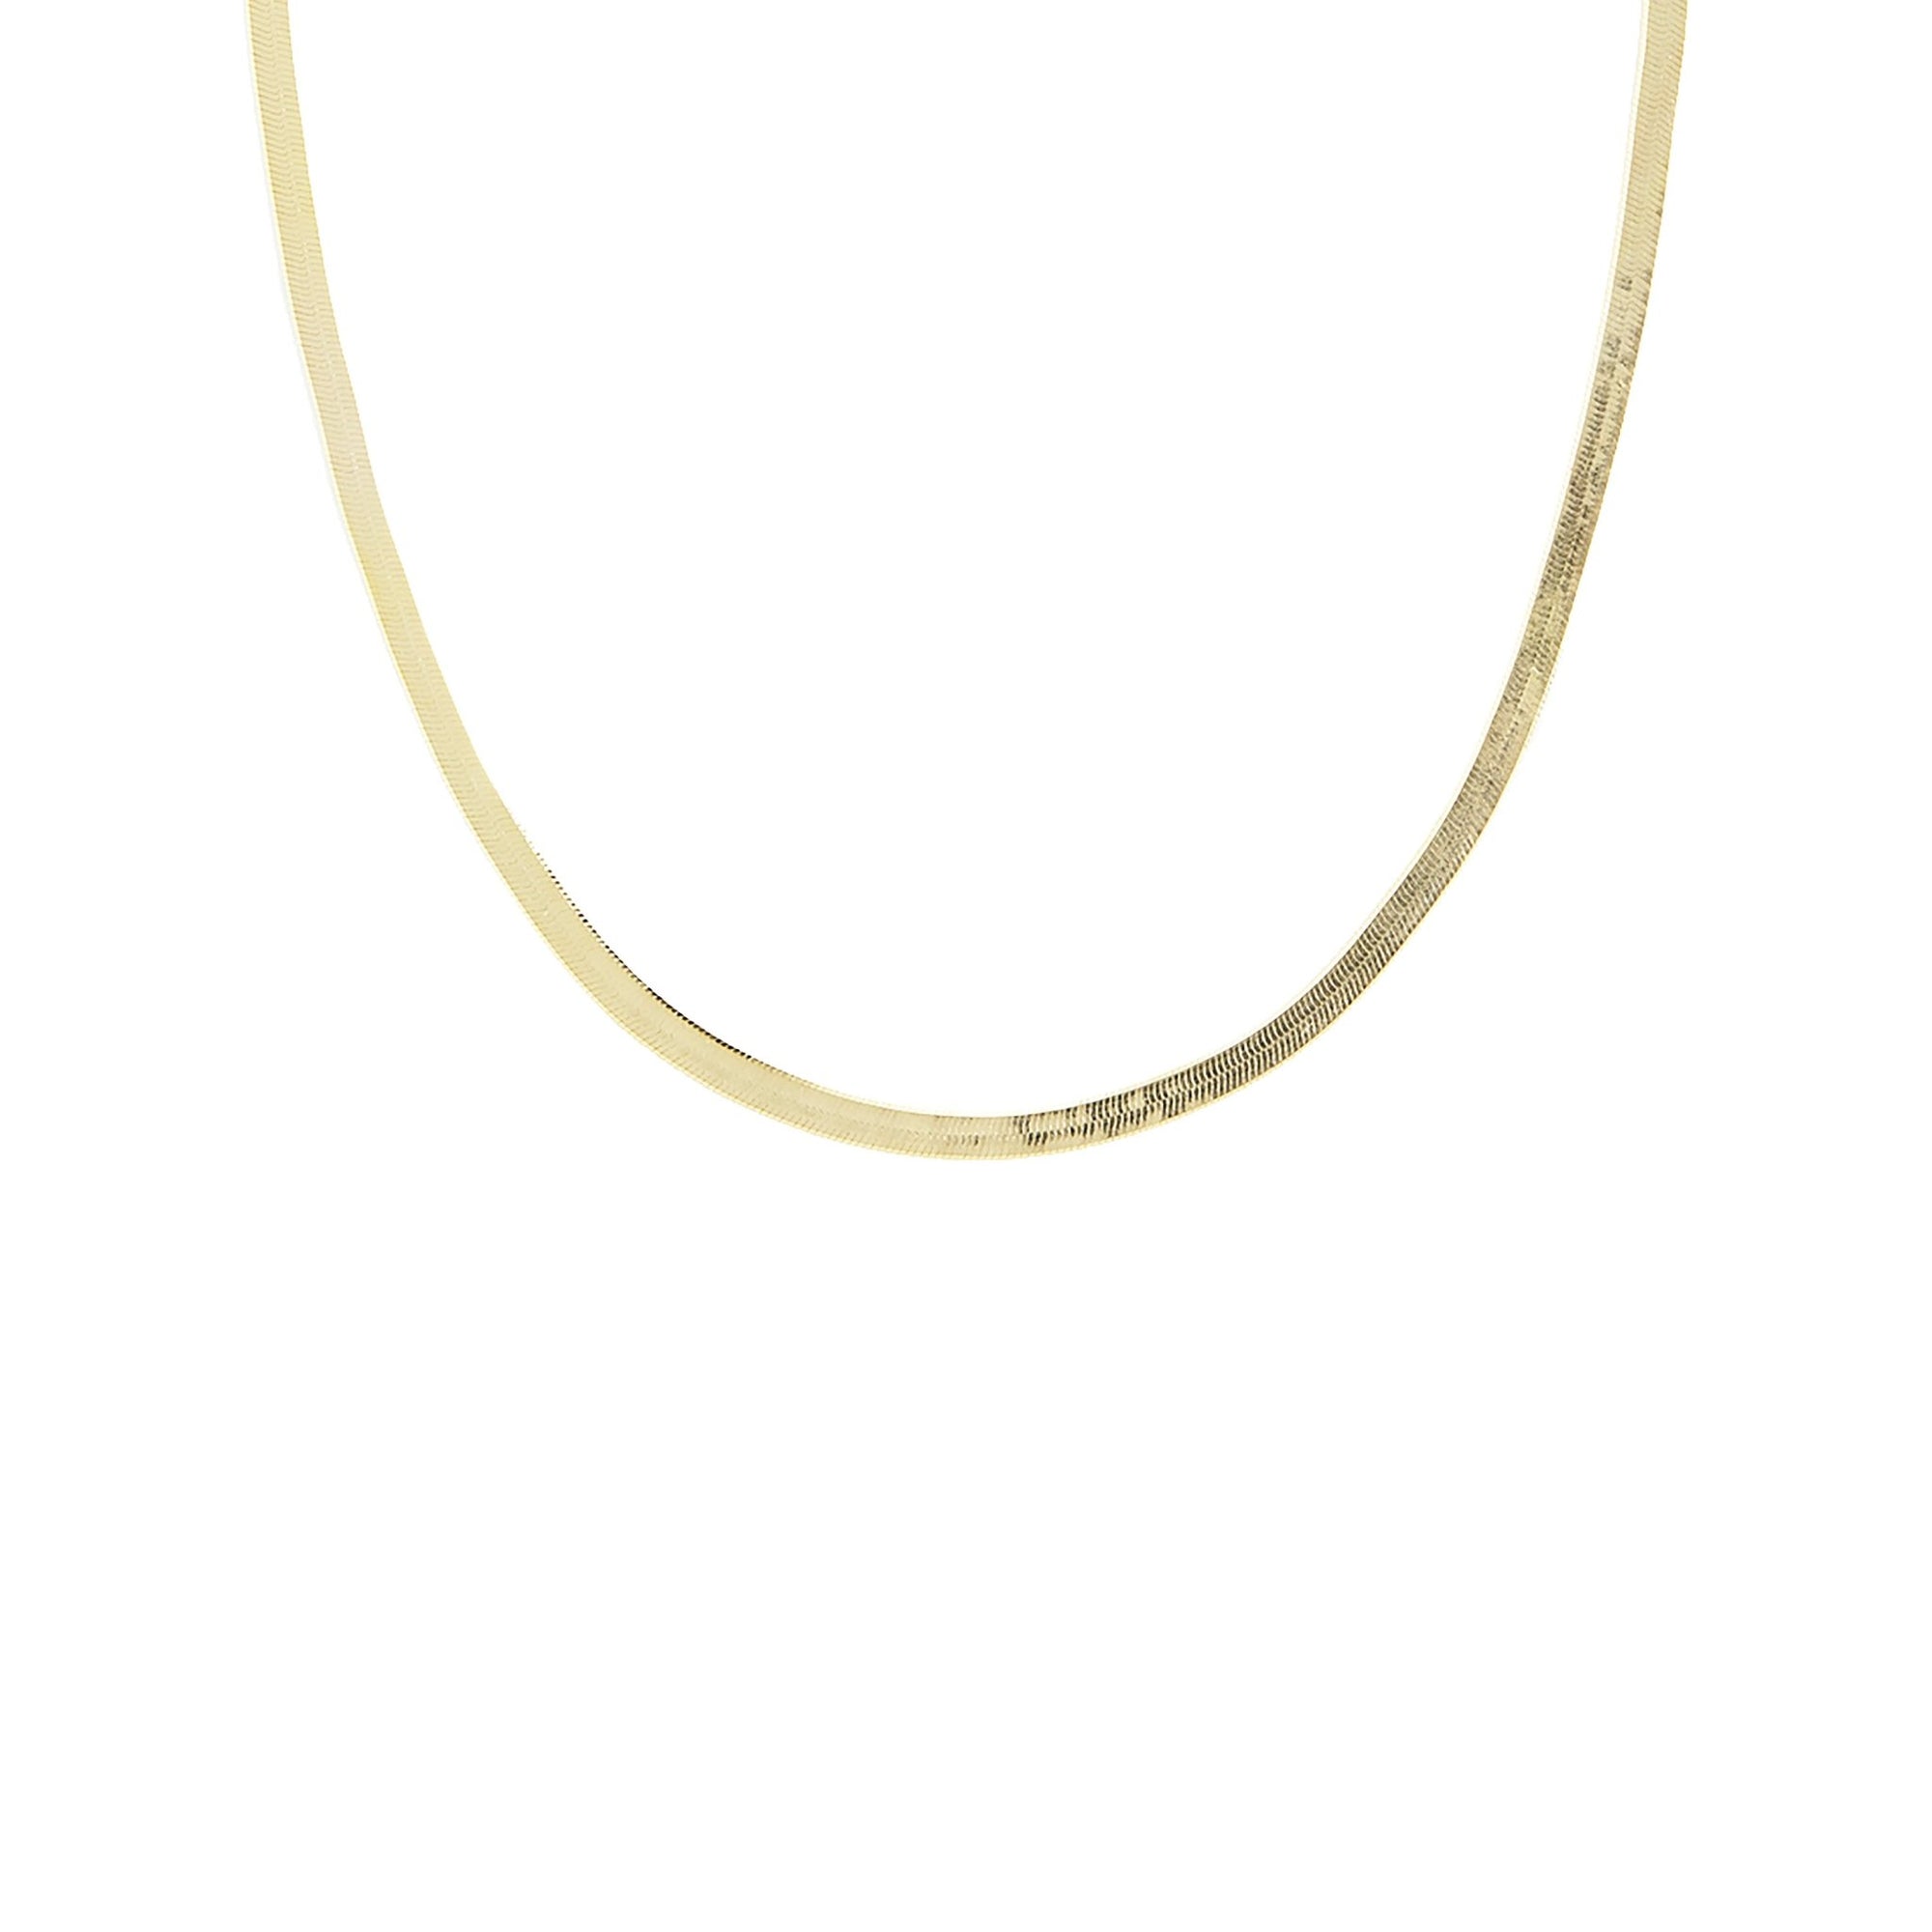 CHARMING HERRINGBONE CHAIN 14-16.5 " NECKLACE GOLD - SO PRETTY CARA COTTER